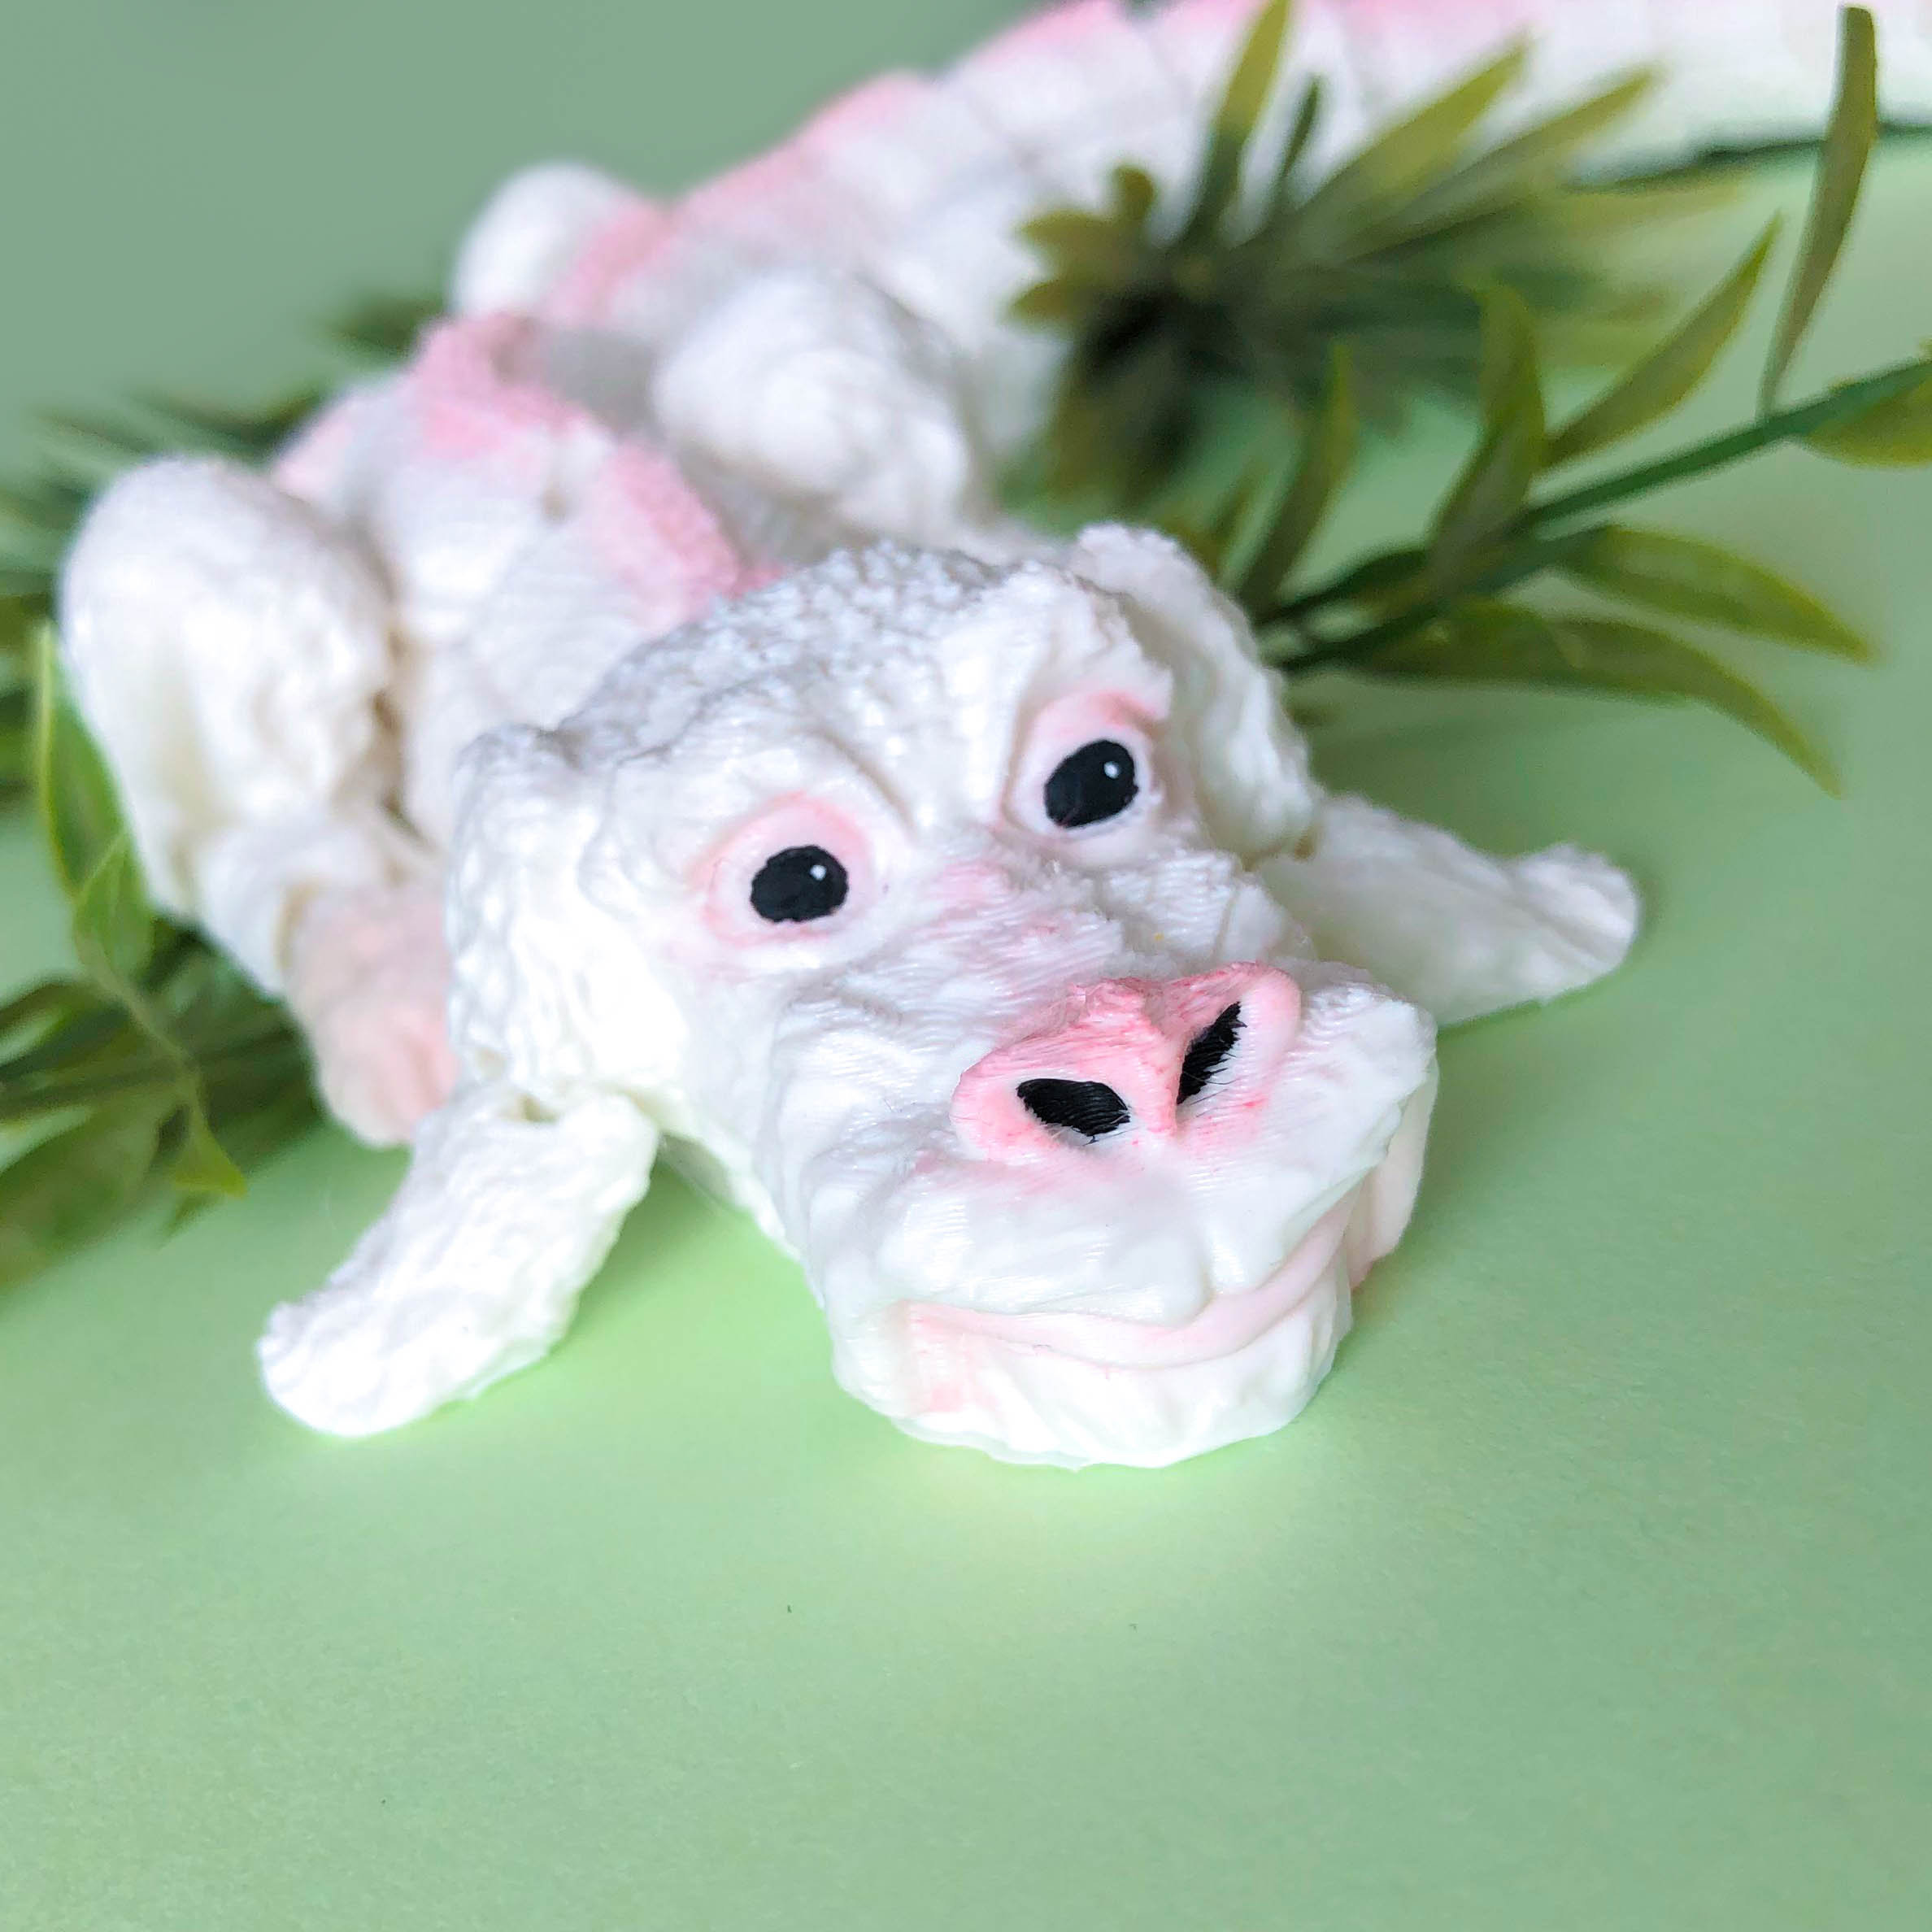 Handmade Falkor Plush Toy From The NeverEnding Story Becomes An Internet  Sensation